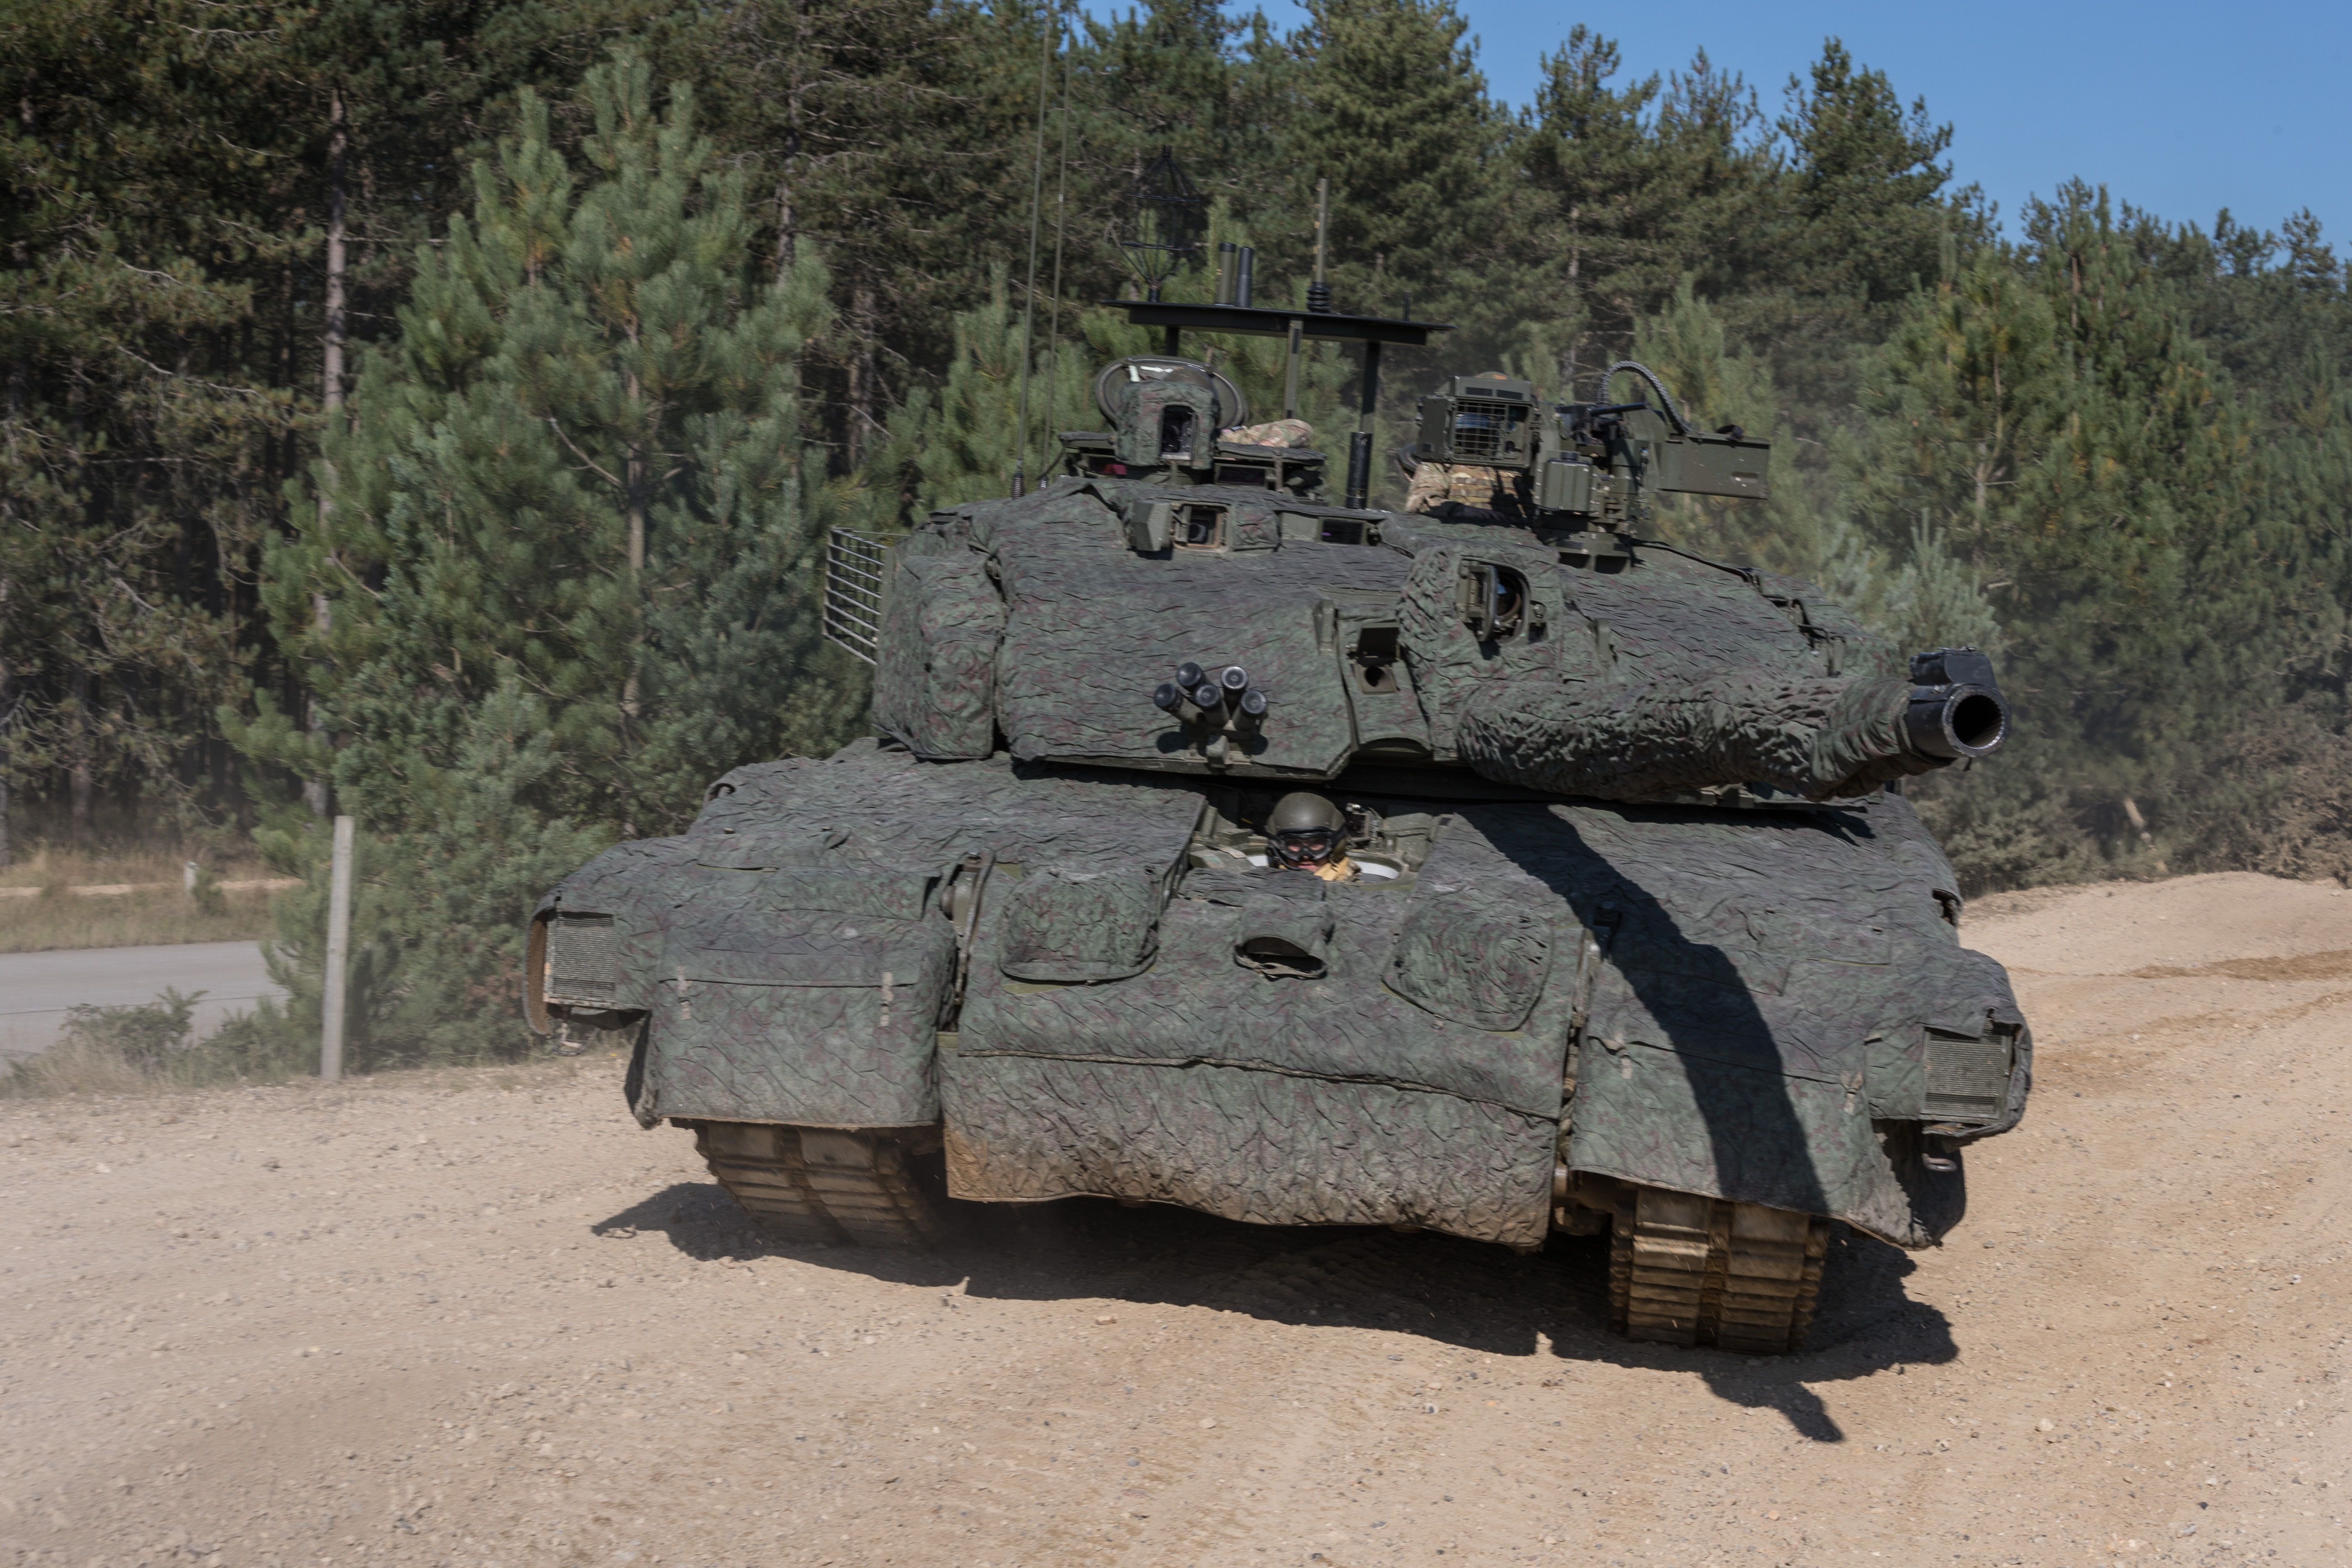 The UK has shown the Challenger 2 TES Megatron tank modified for